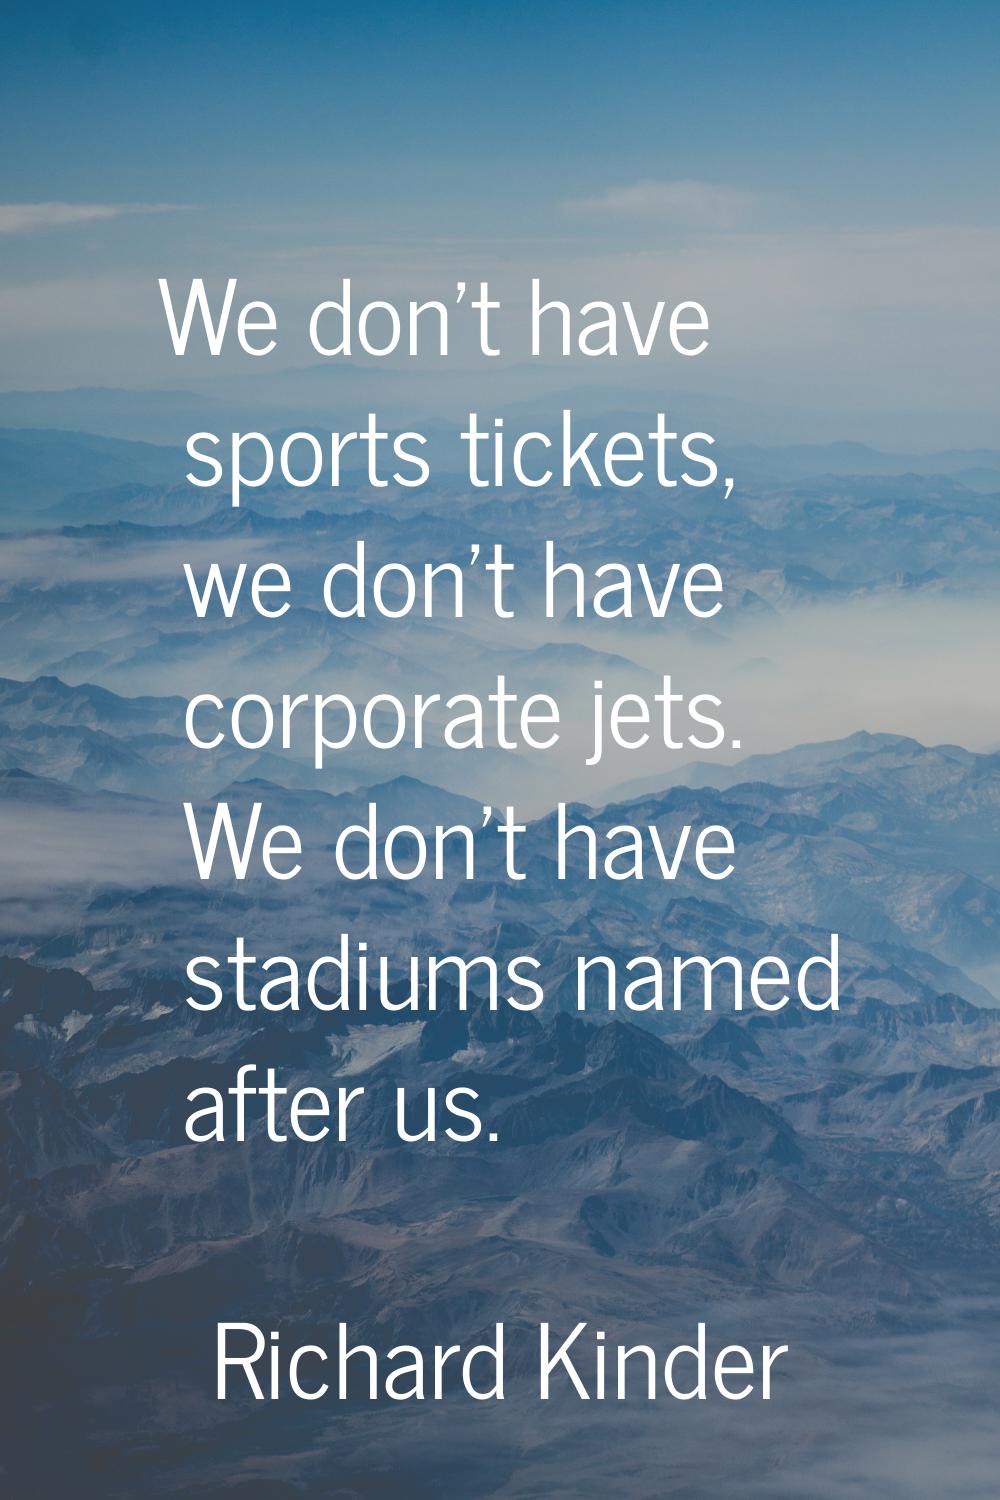 We don't have sports tickets, we don't have corporate jets. We don't have stadiums named after us.